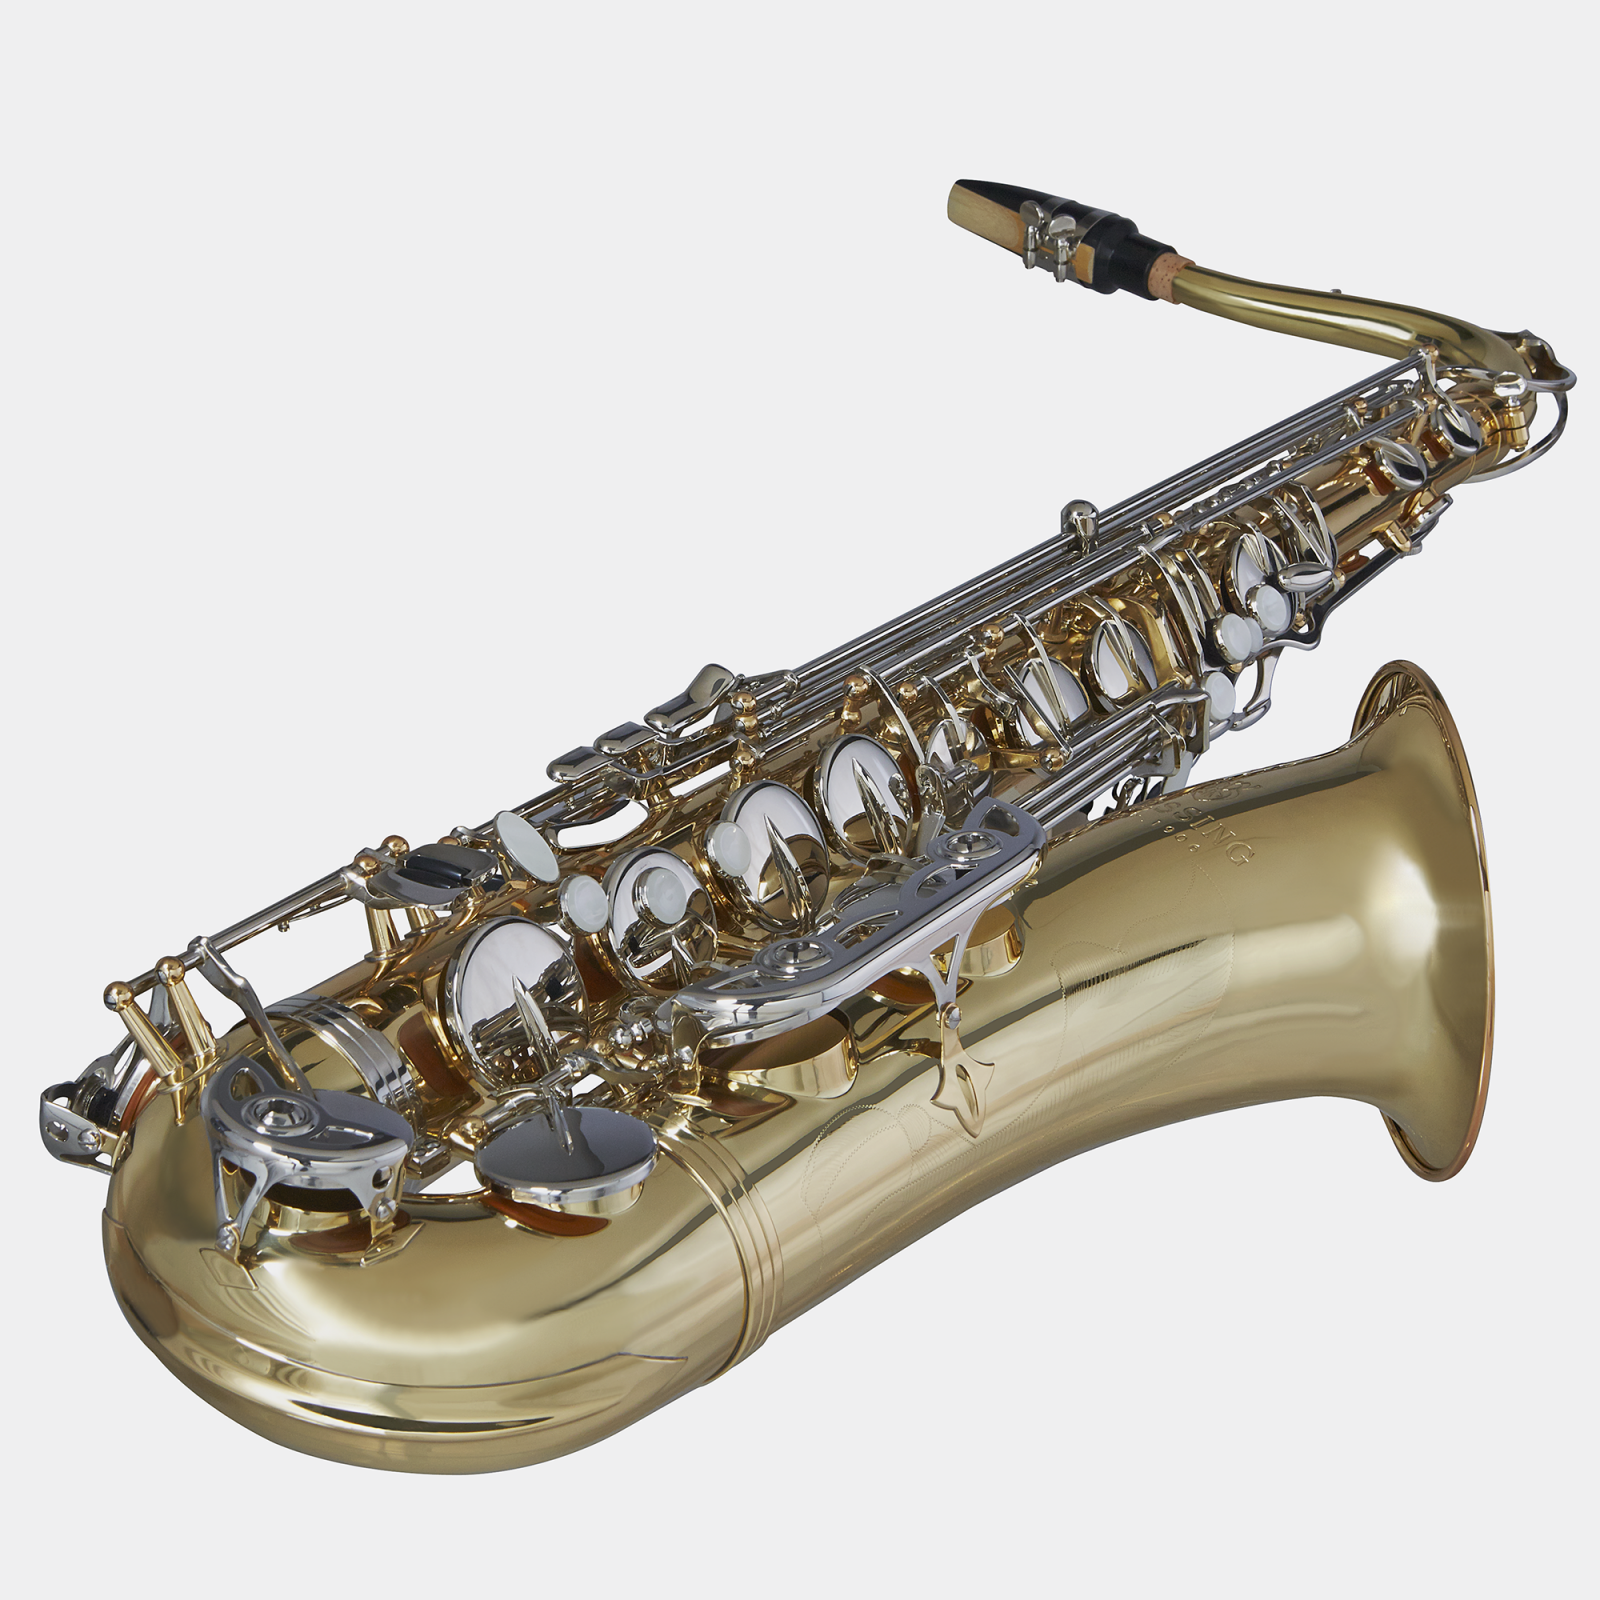 Blessing Bb Tenor Saxophone, Gold lacquer, Outfit